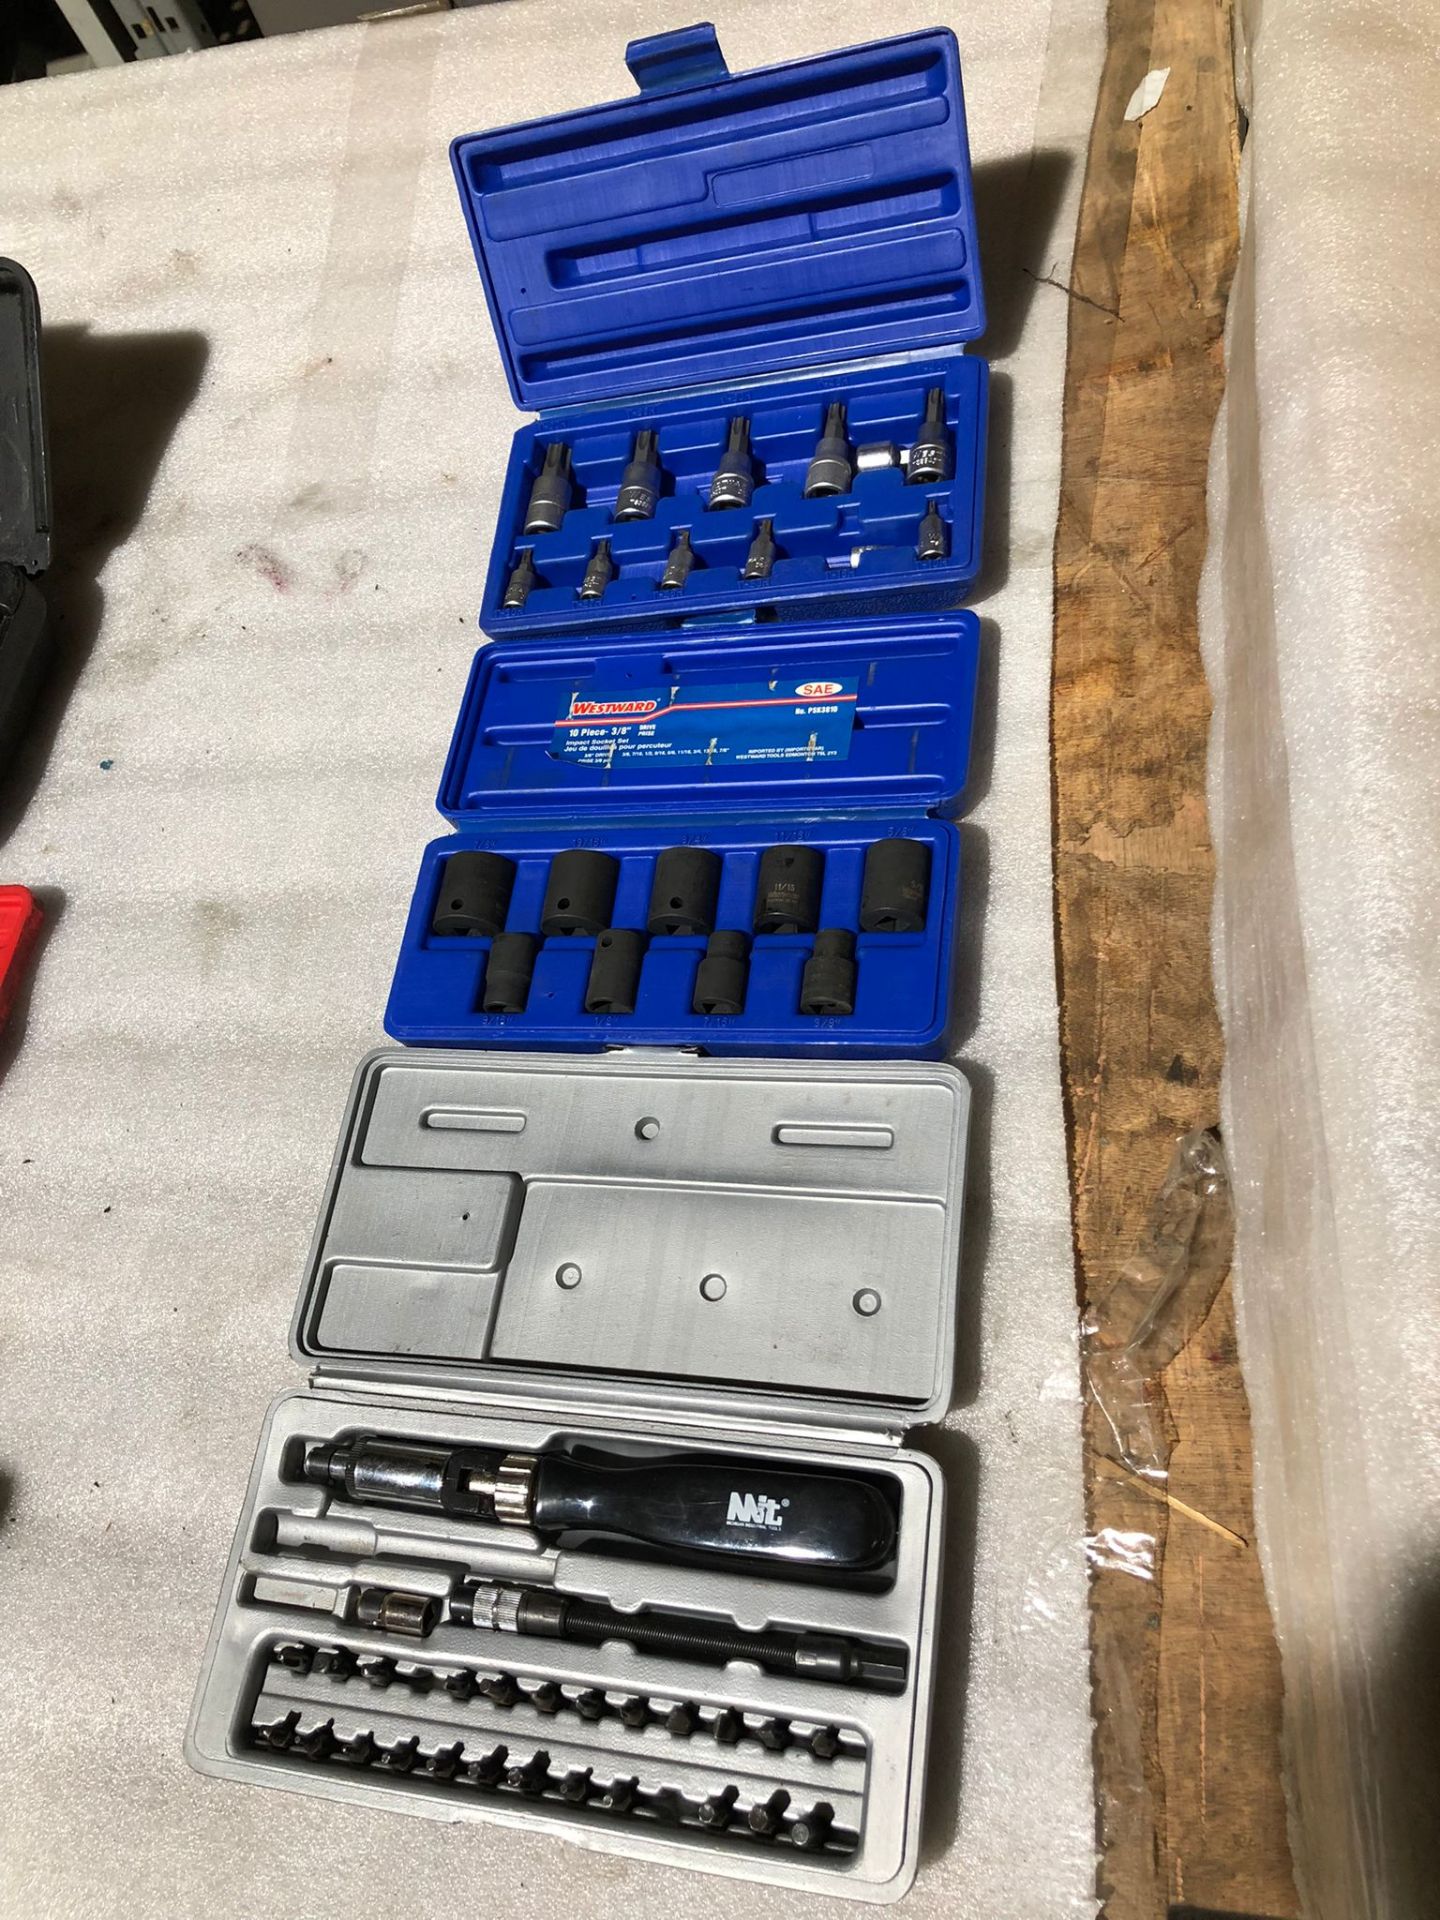 Lot of 3 Impact Gun Socket Sets in cases with torque control driver with bits *** FROM 5-STAR